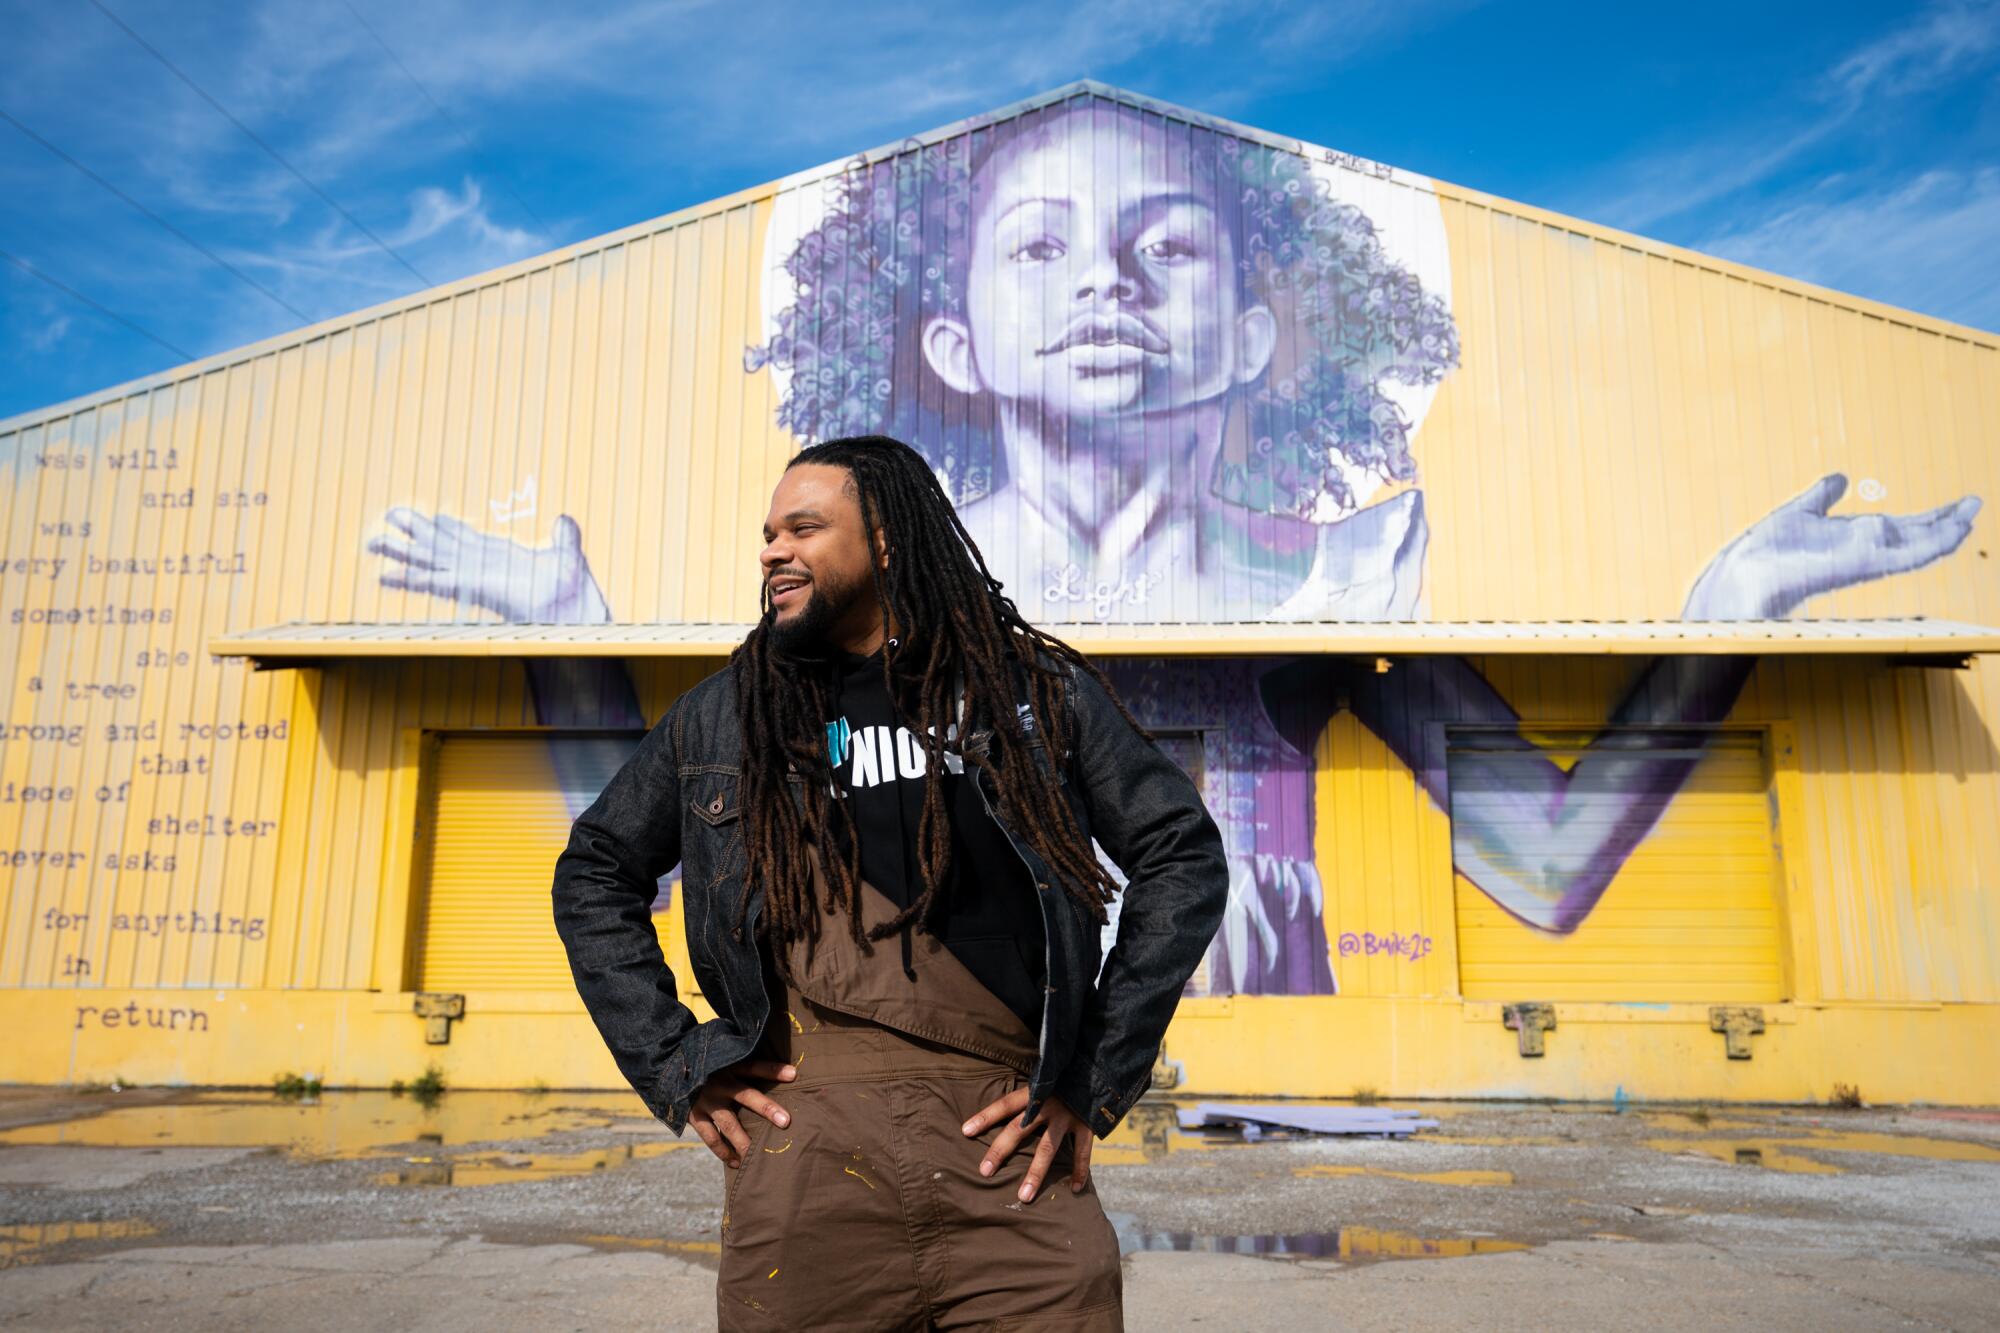 As he transforms neglected corners of New Orleans, artist Brandan